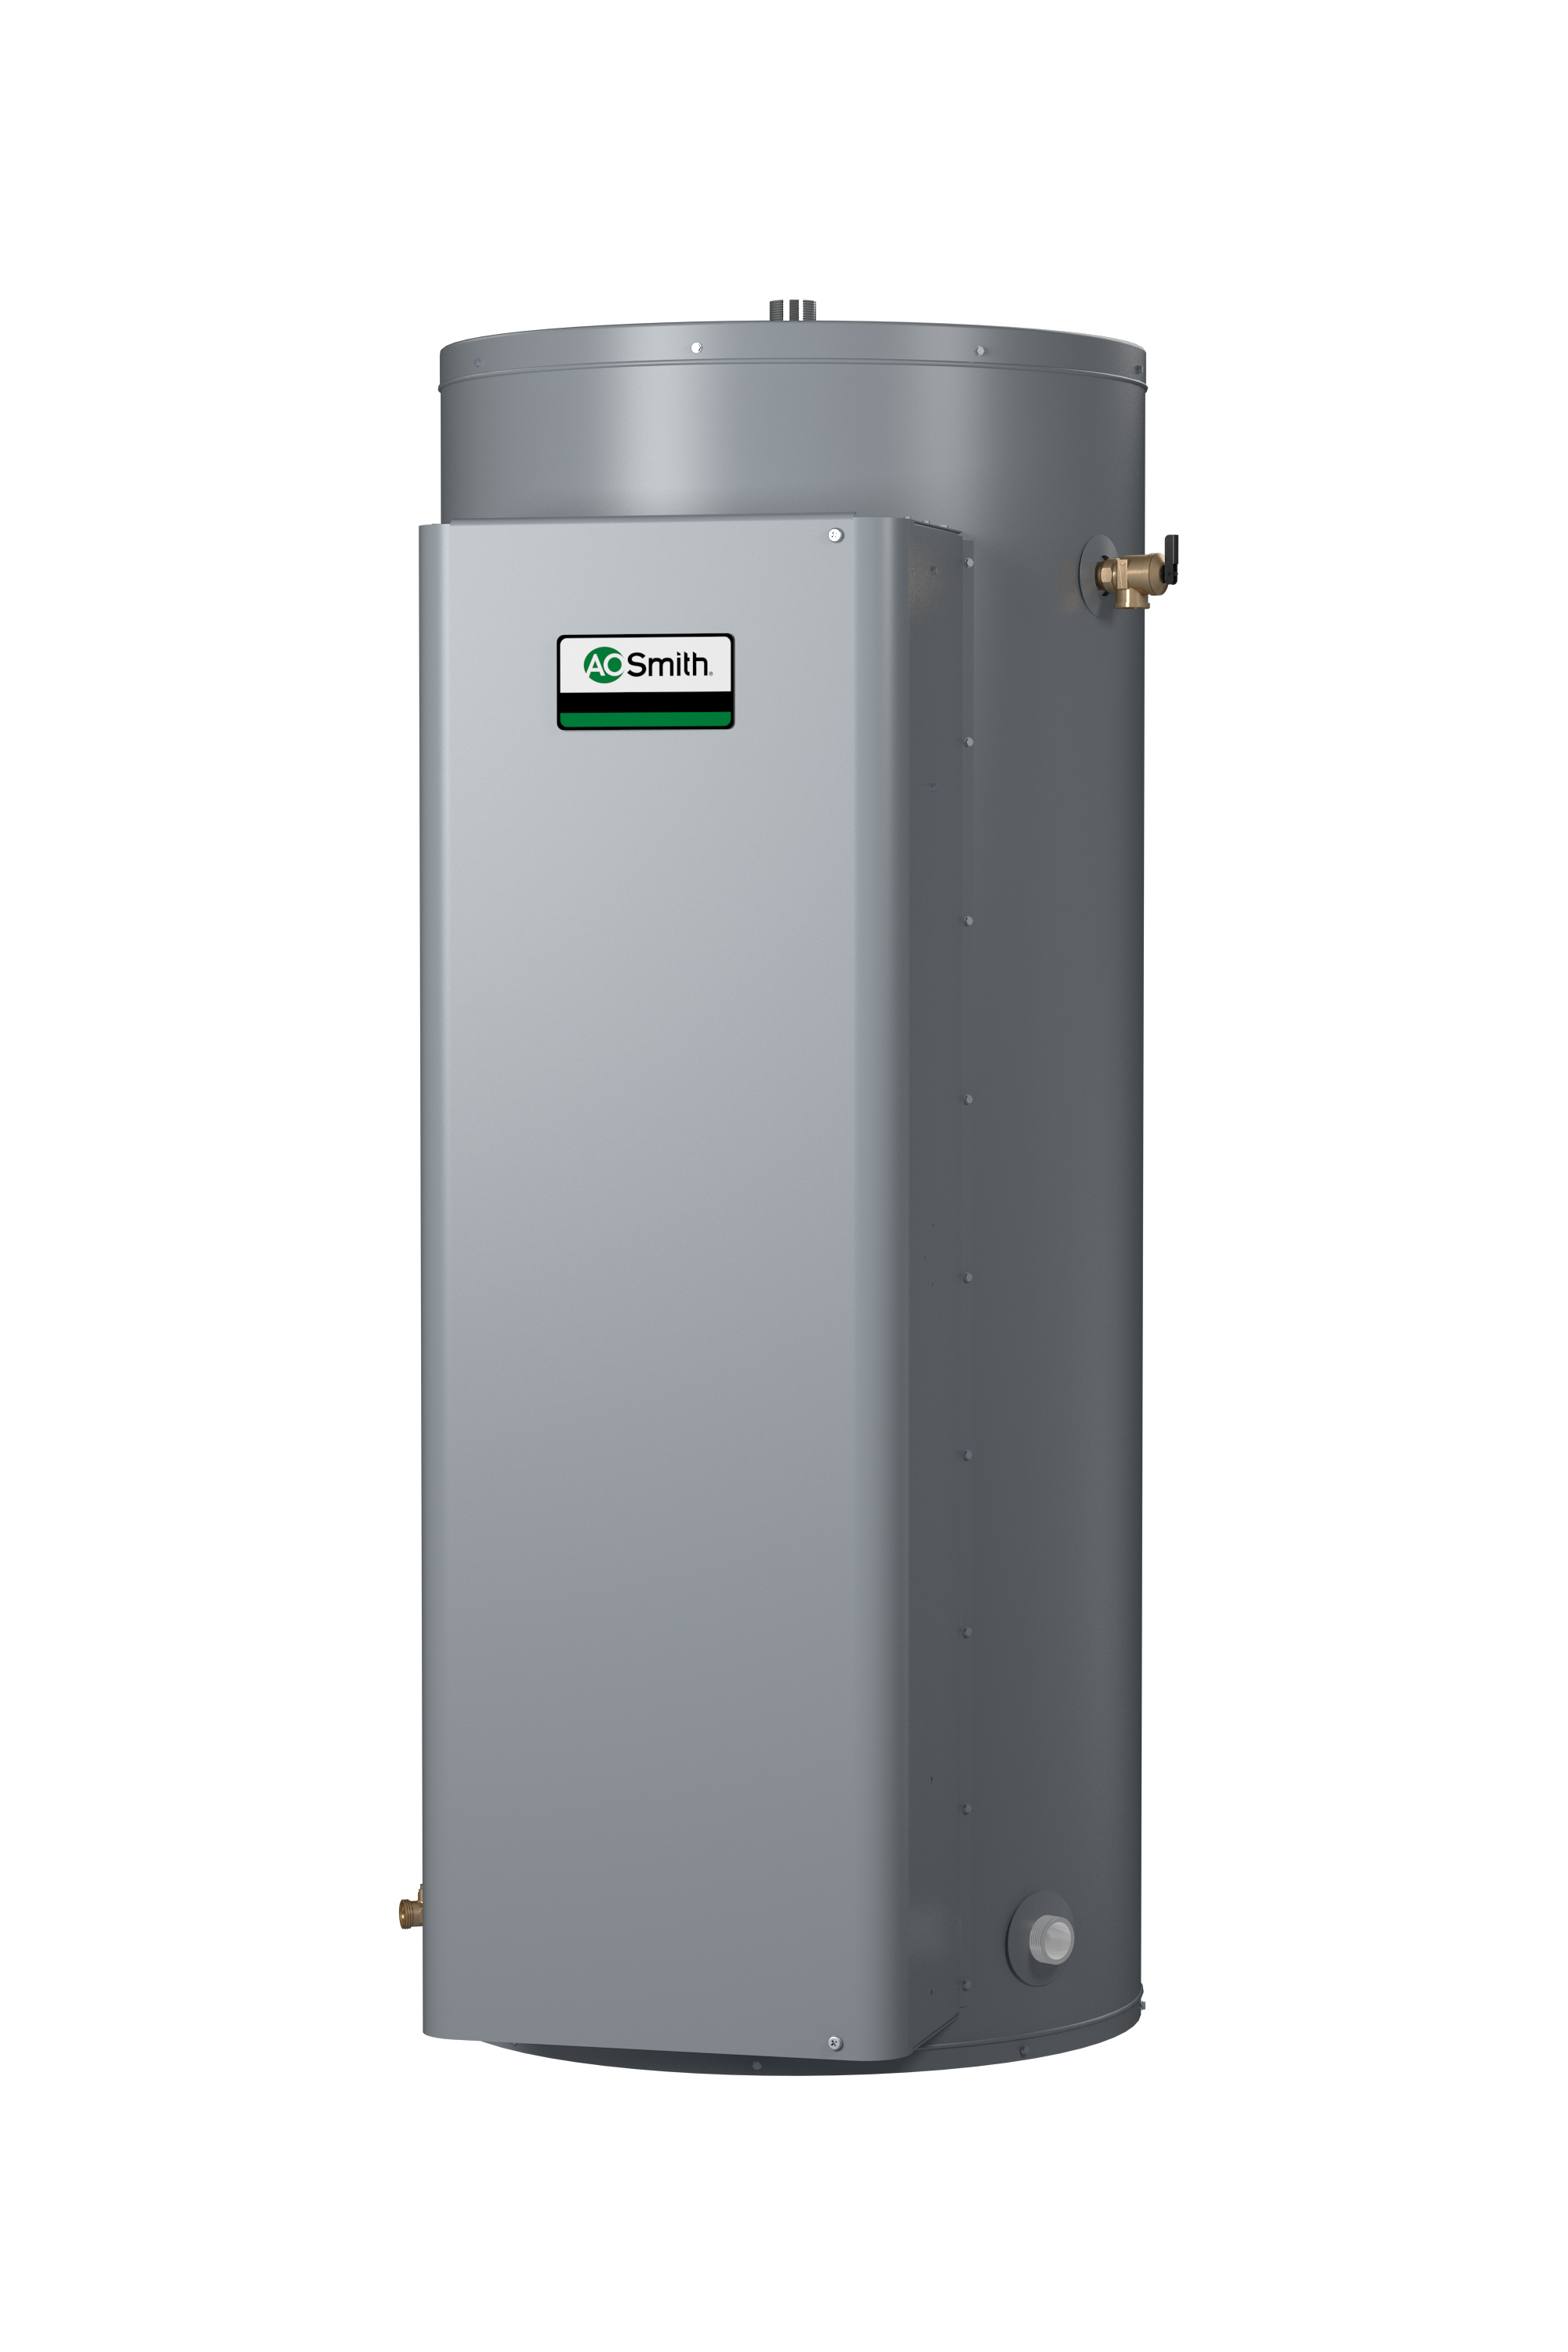 AO SMITH DRE-80-54, 80 GALLONS, 54.0KW, 240 VOLT, 225 AMPS, 1 PHASE, 9 ELEMENT, COMMERCIAL ELECTRIC WATER HEATER, GOLD SERIES